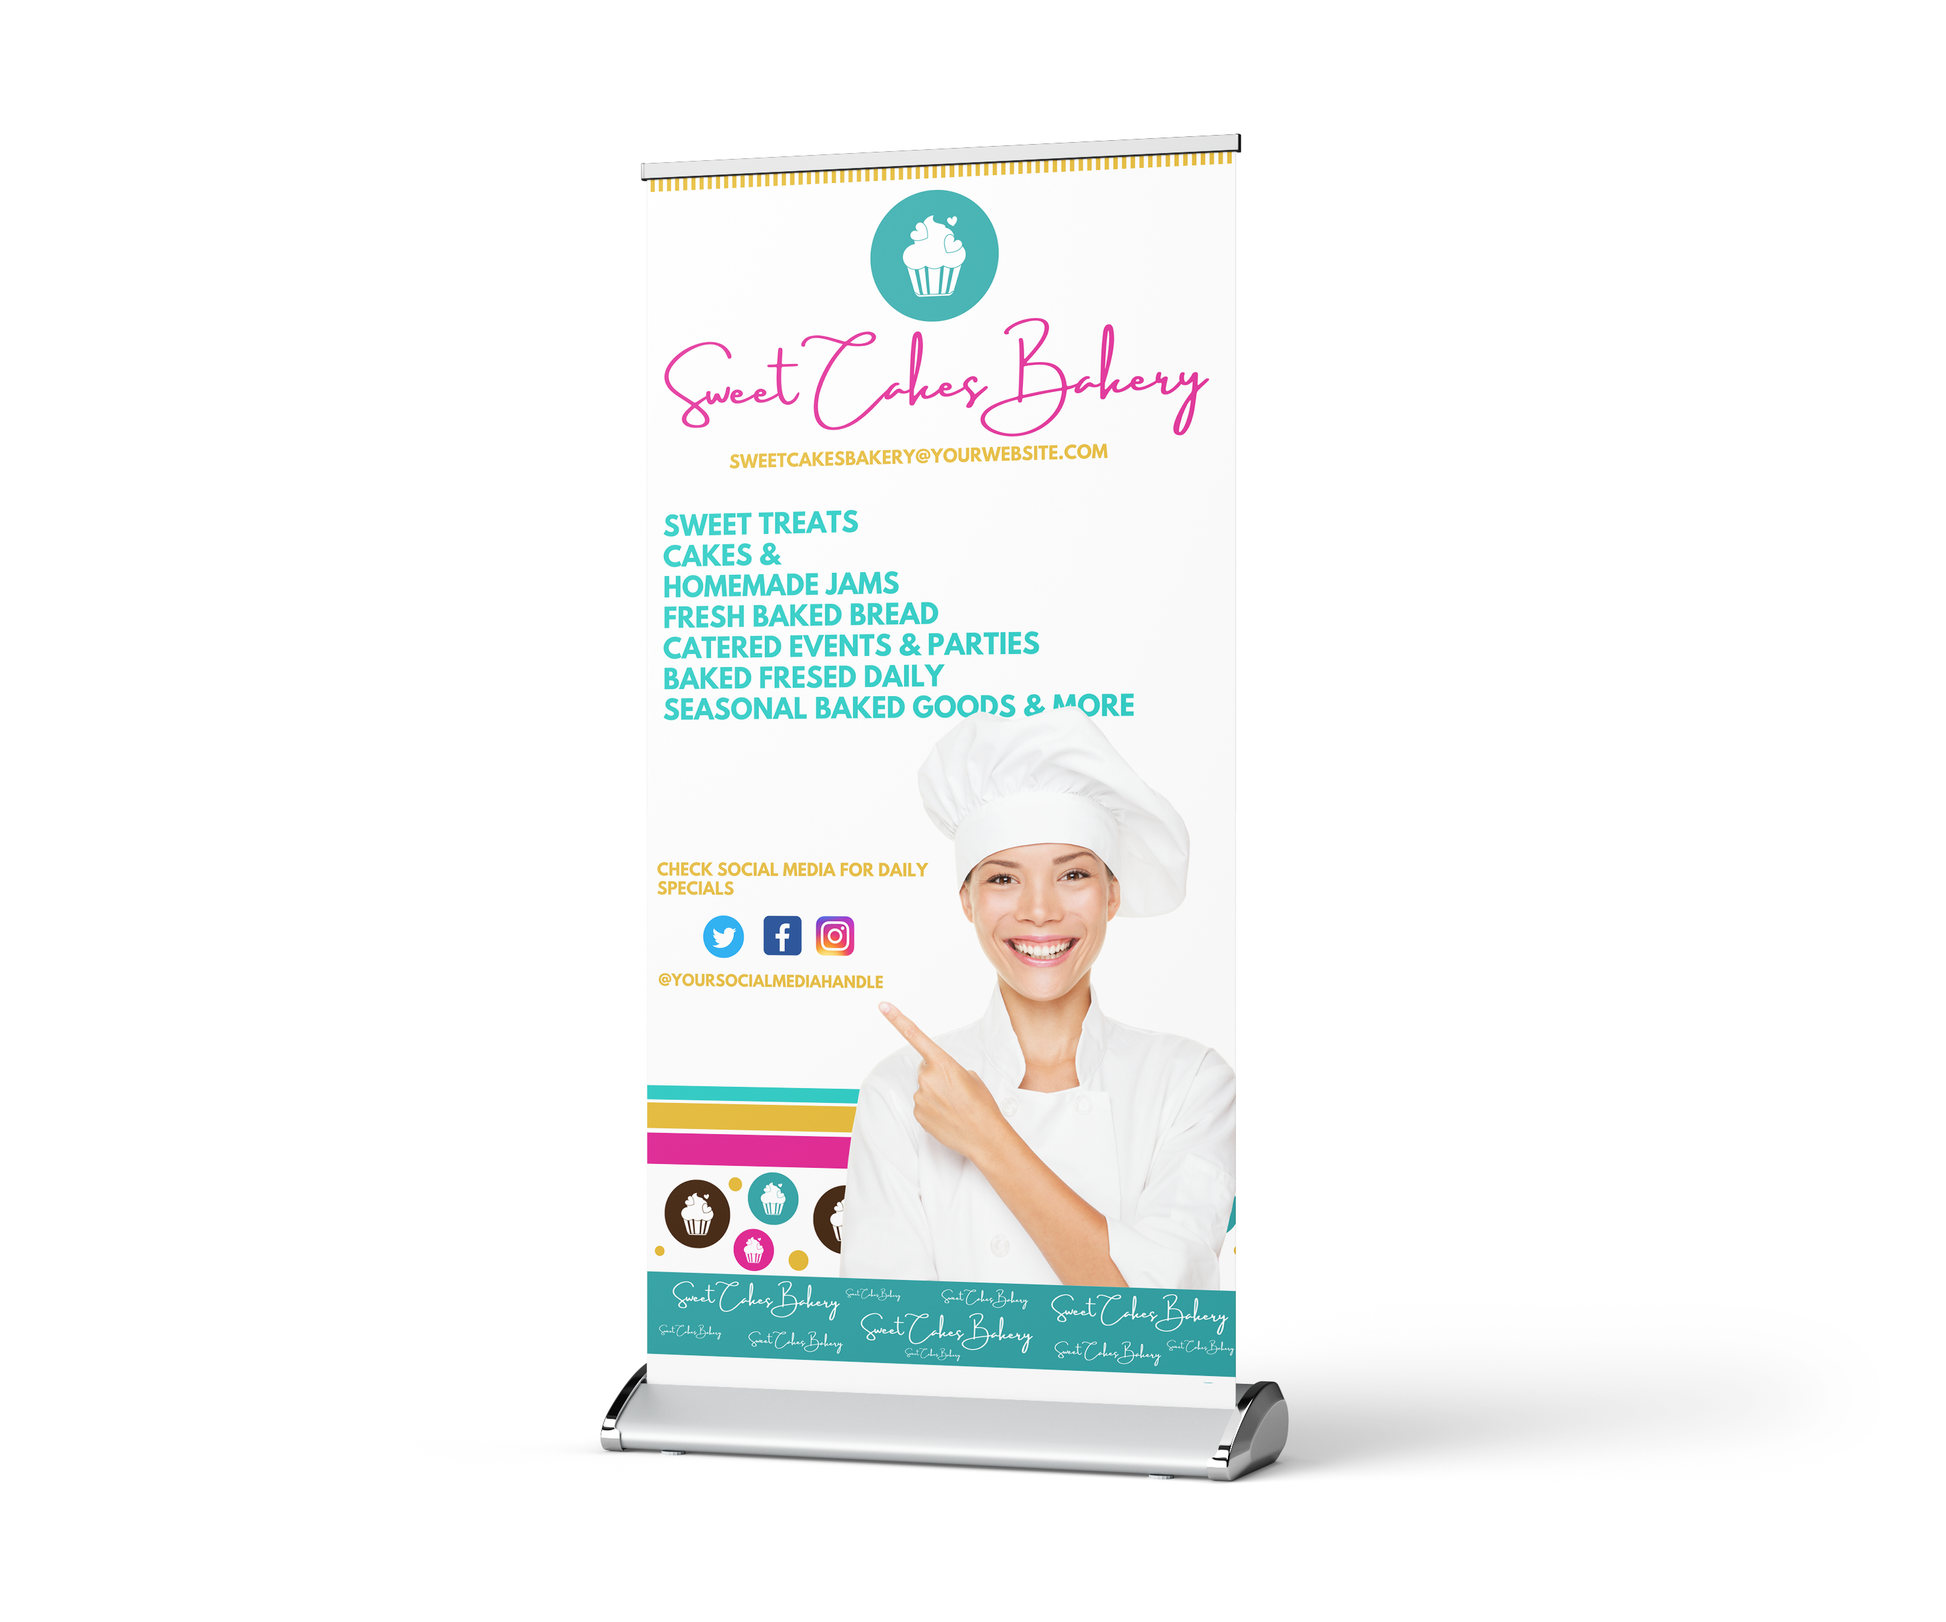 Custom retractable banner for small business owners and organizations. For personal or business use.